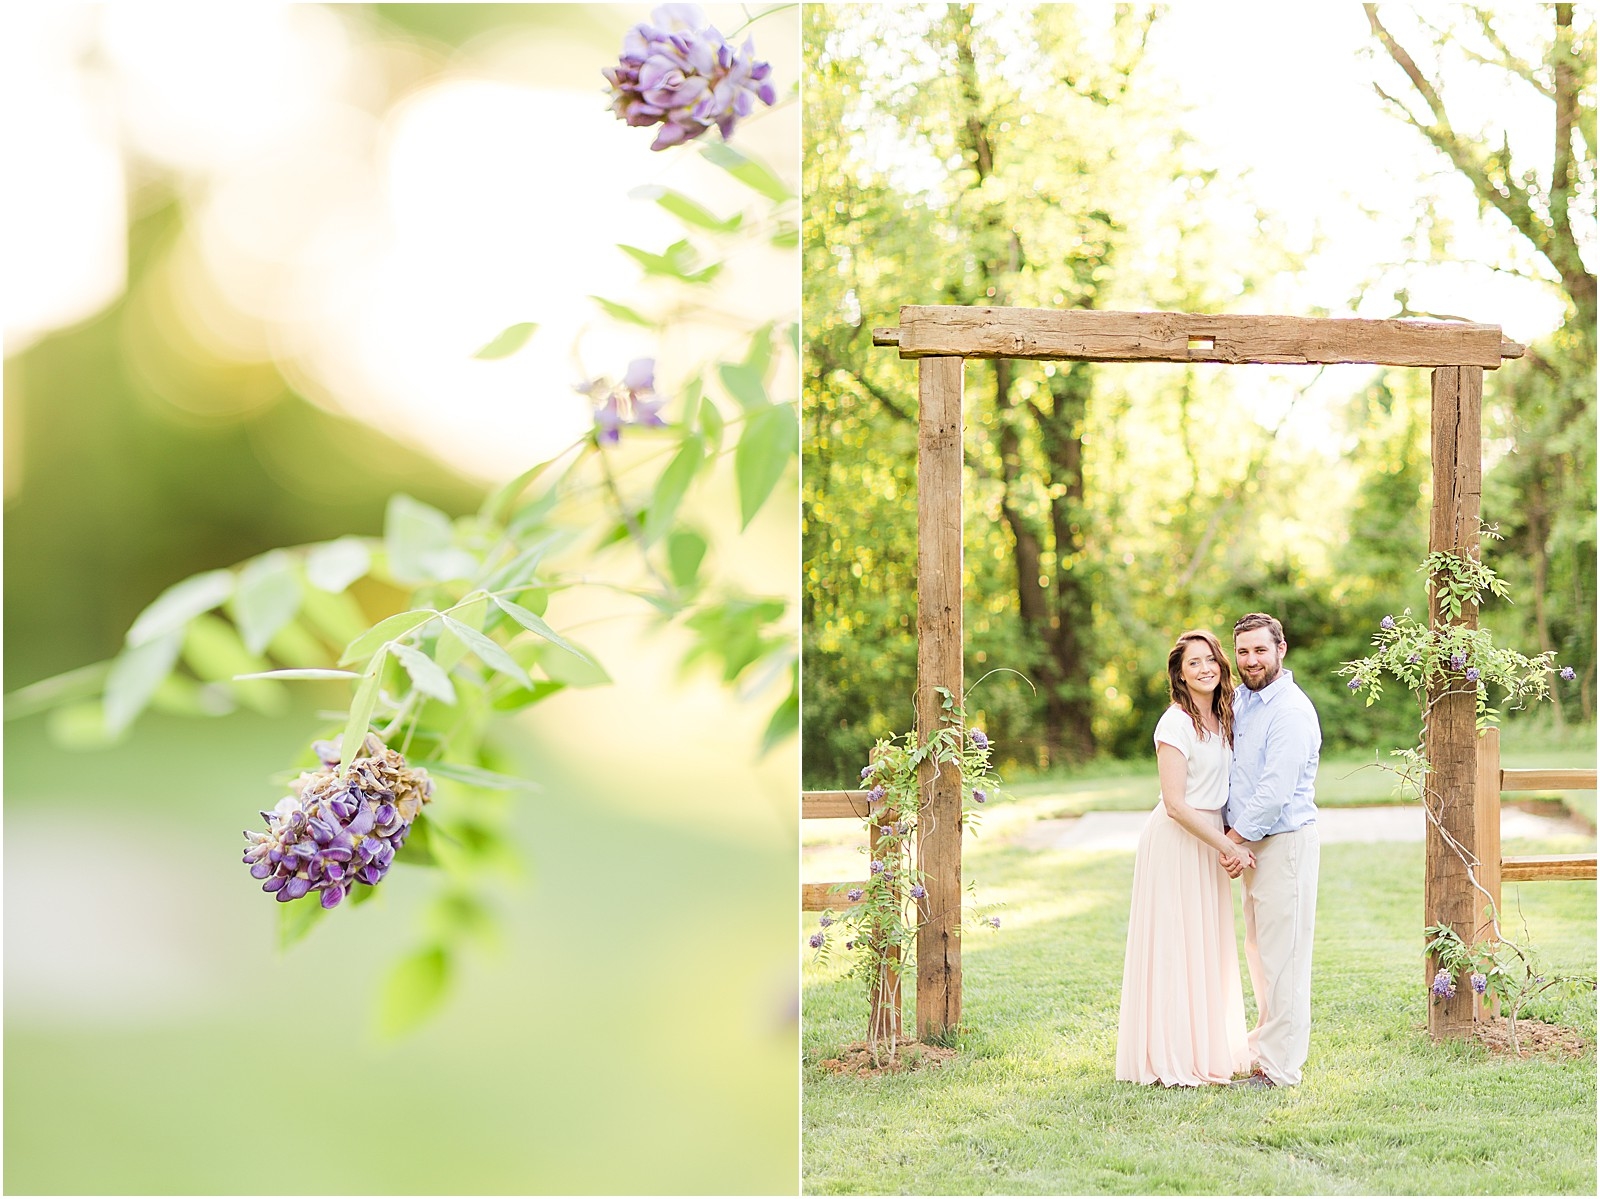 Bailey and Ben | Evansville Engagement Session | Bret and Brandie 013.jpg